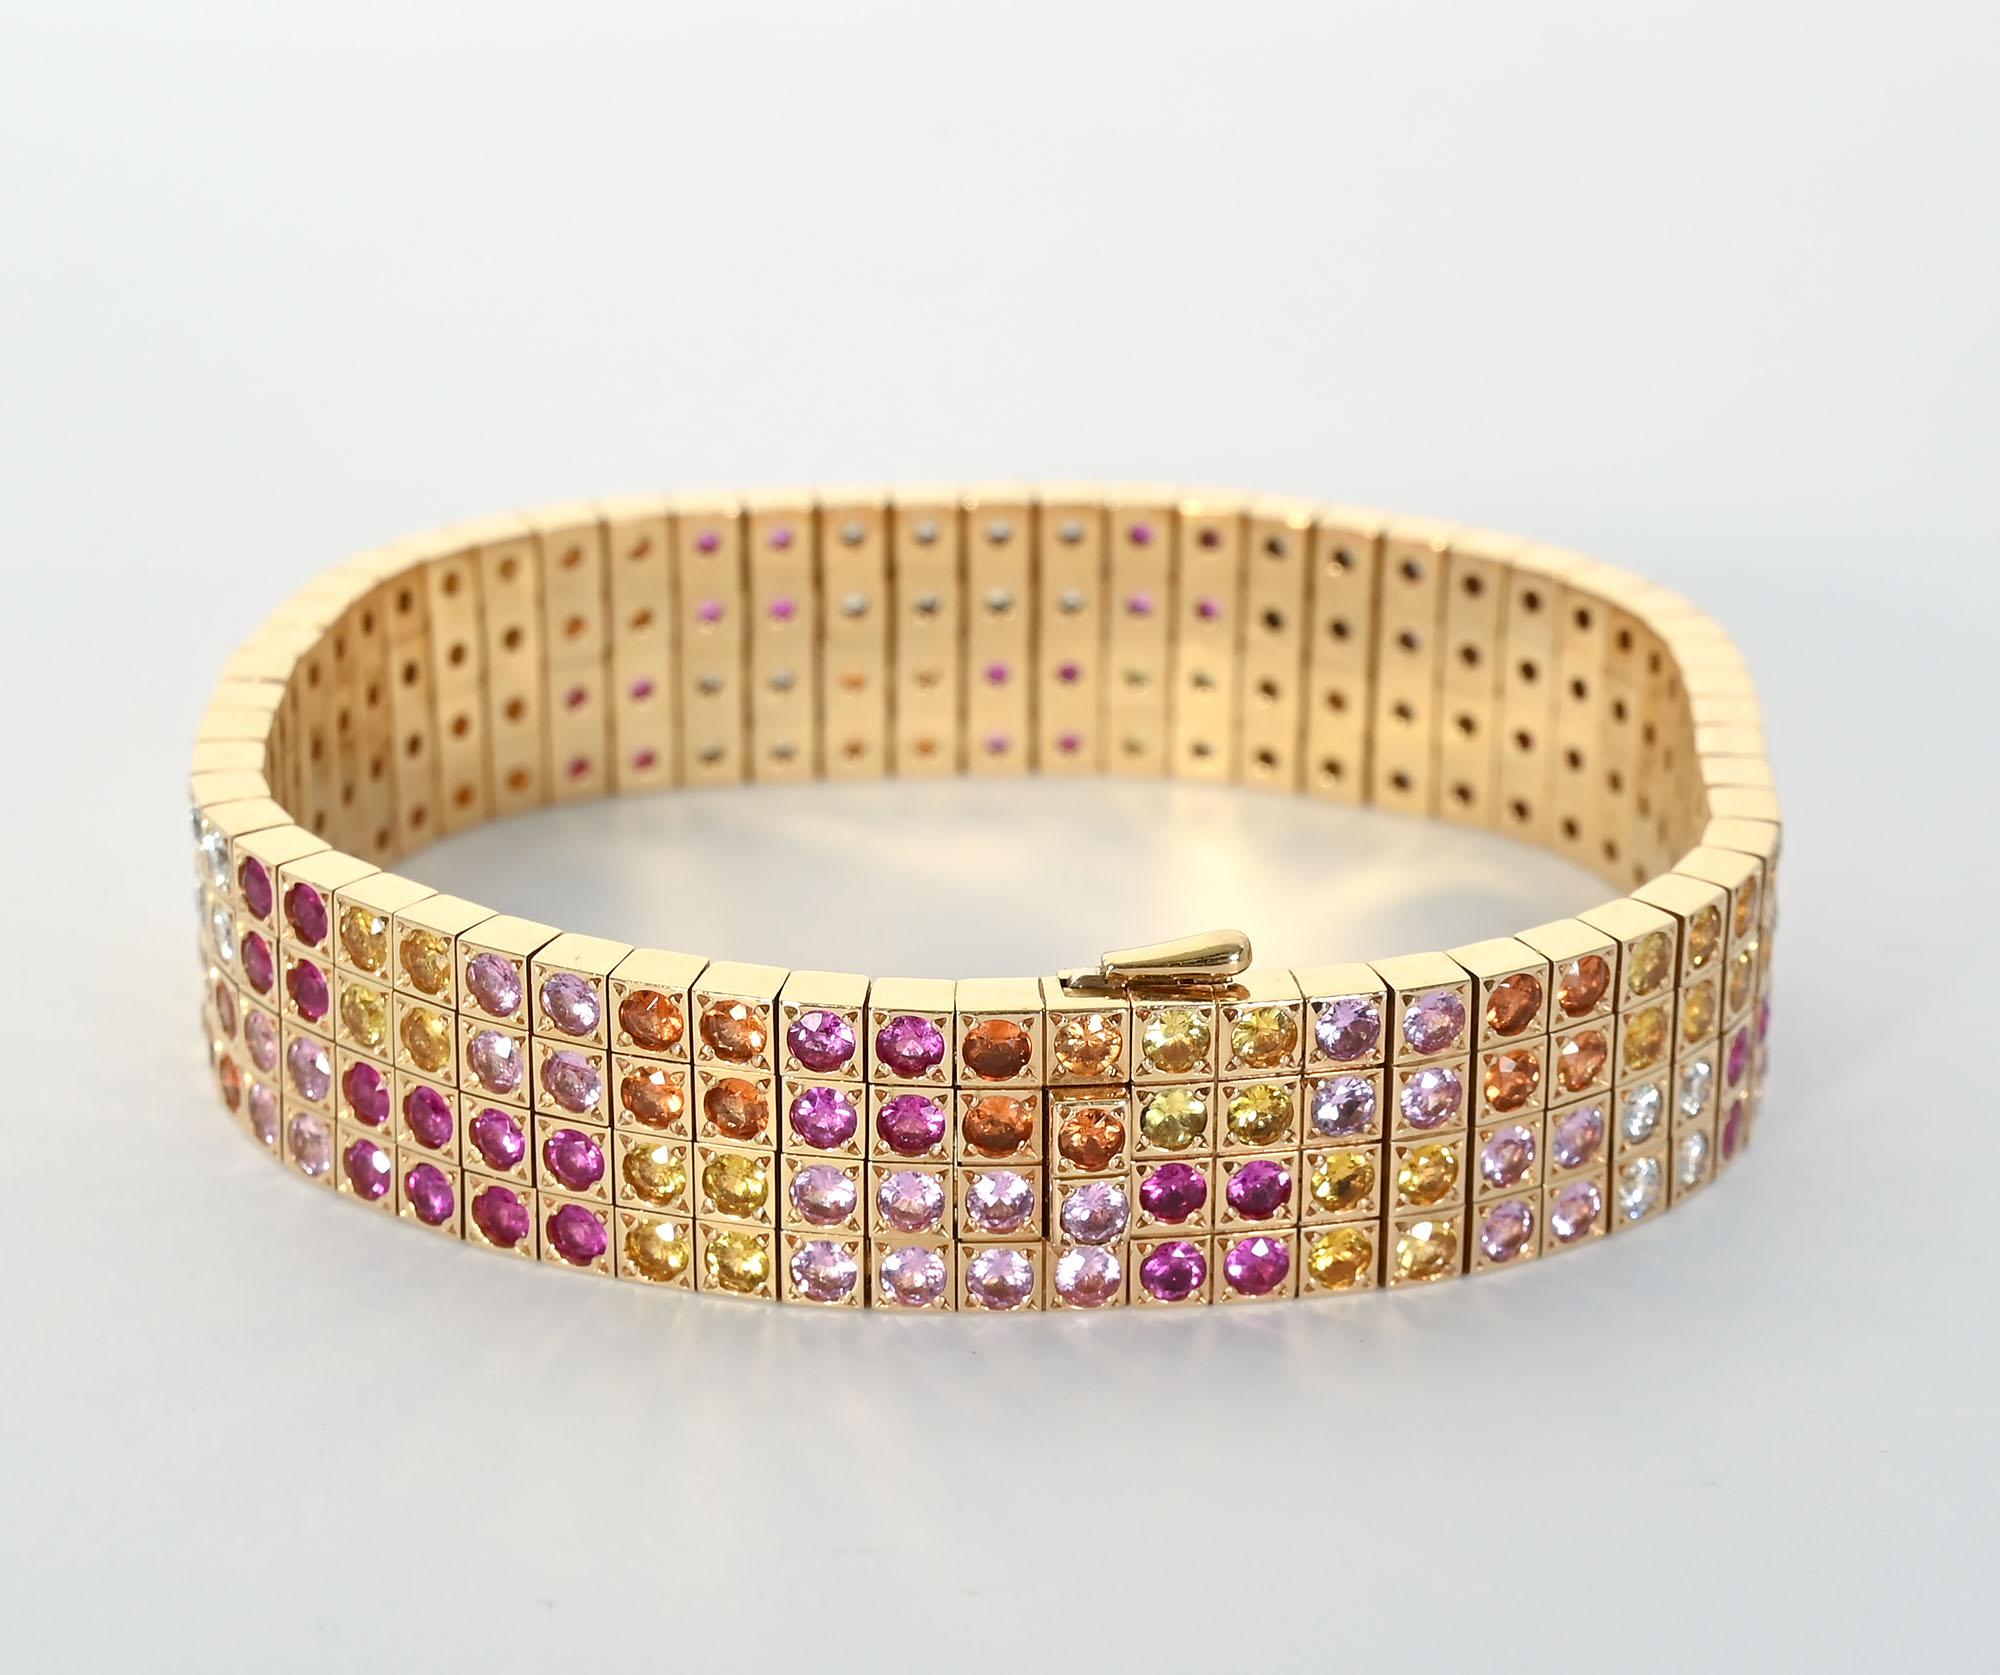 Cartier Strap Bracelet with Diamonds and Sapphires In Excellent Condition For Sale In Darnestown, MD